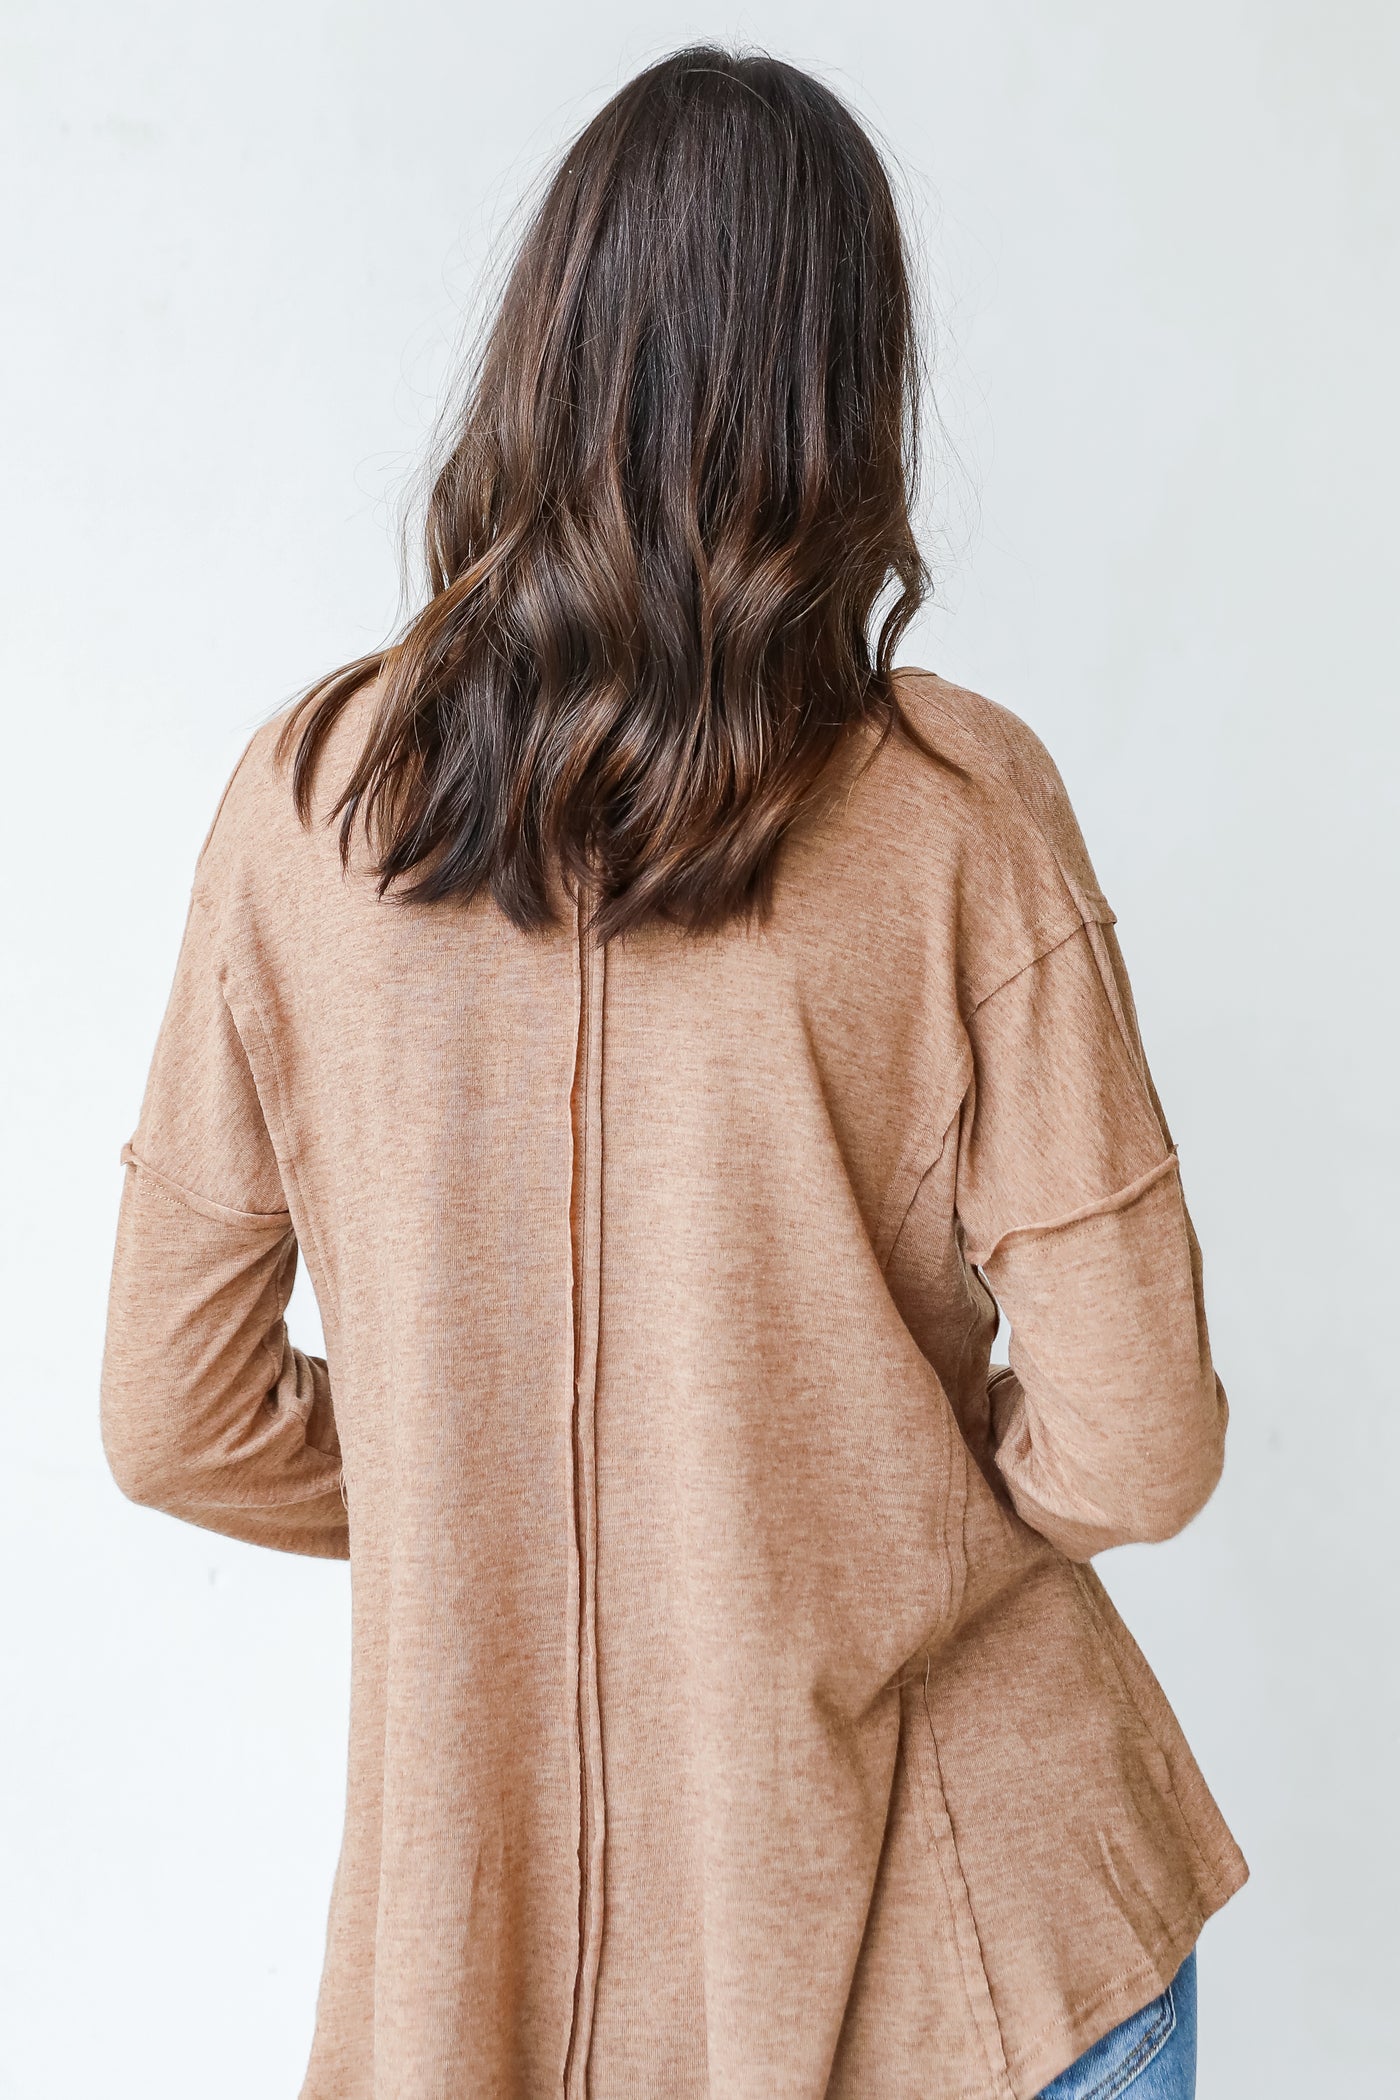 Jersey Knit Top in camel back view